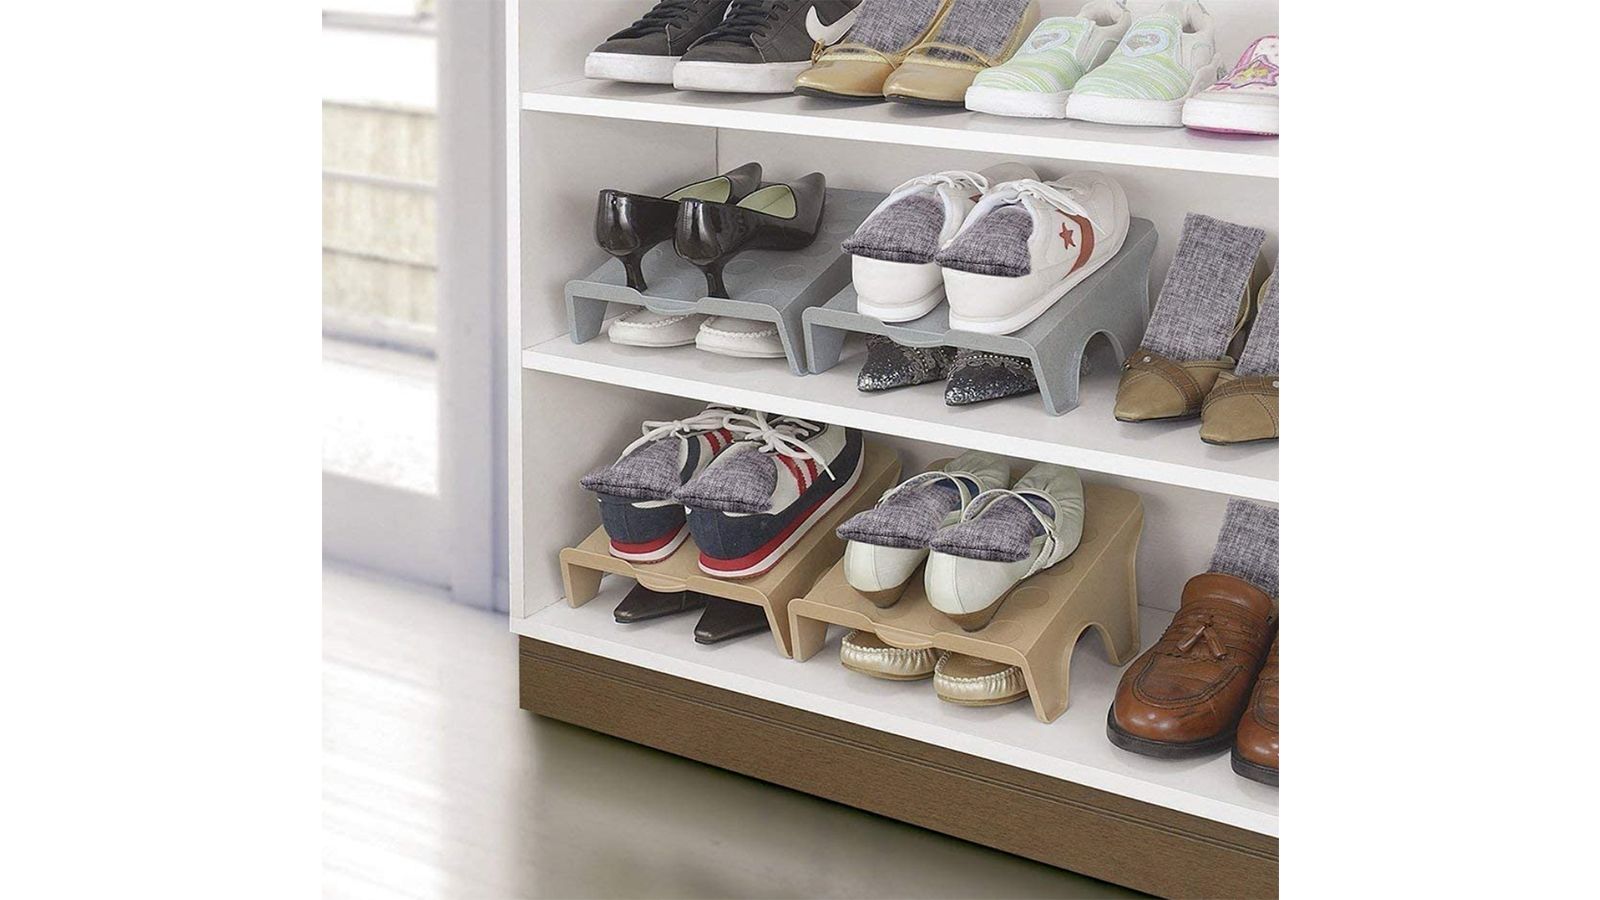 24 Super Practical Shoes Storage Ideas to Organize Your Shoes 